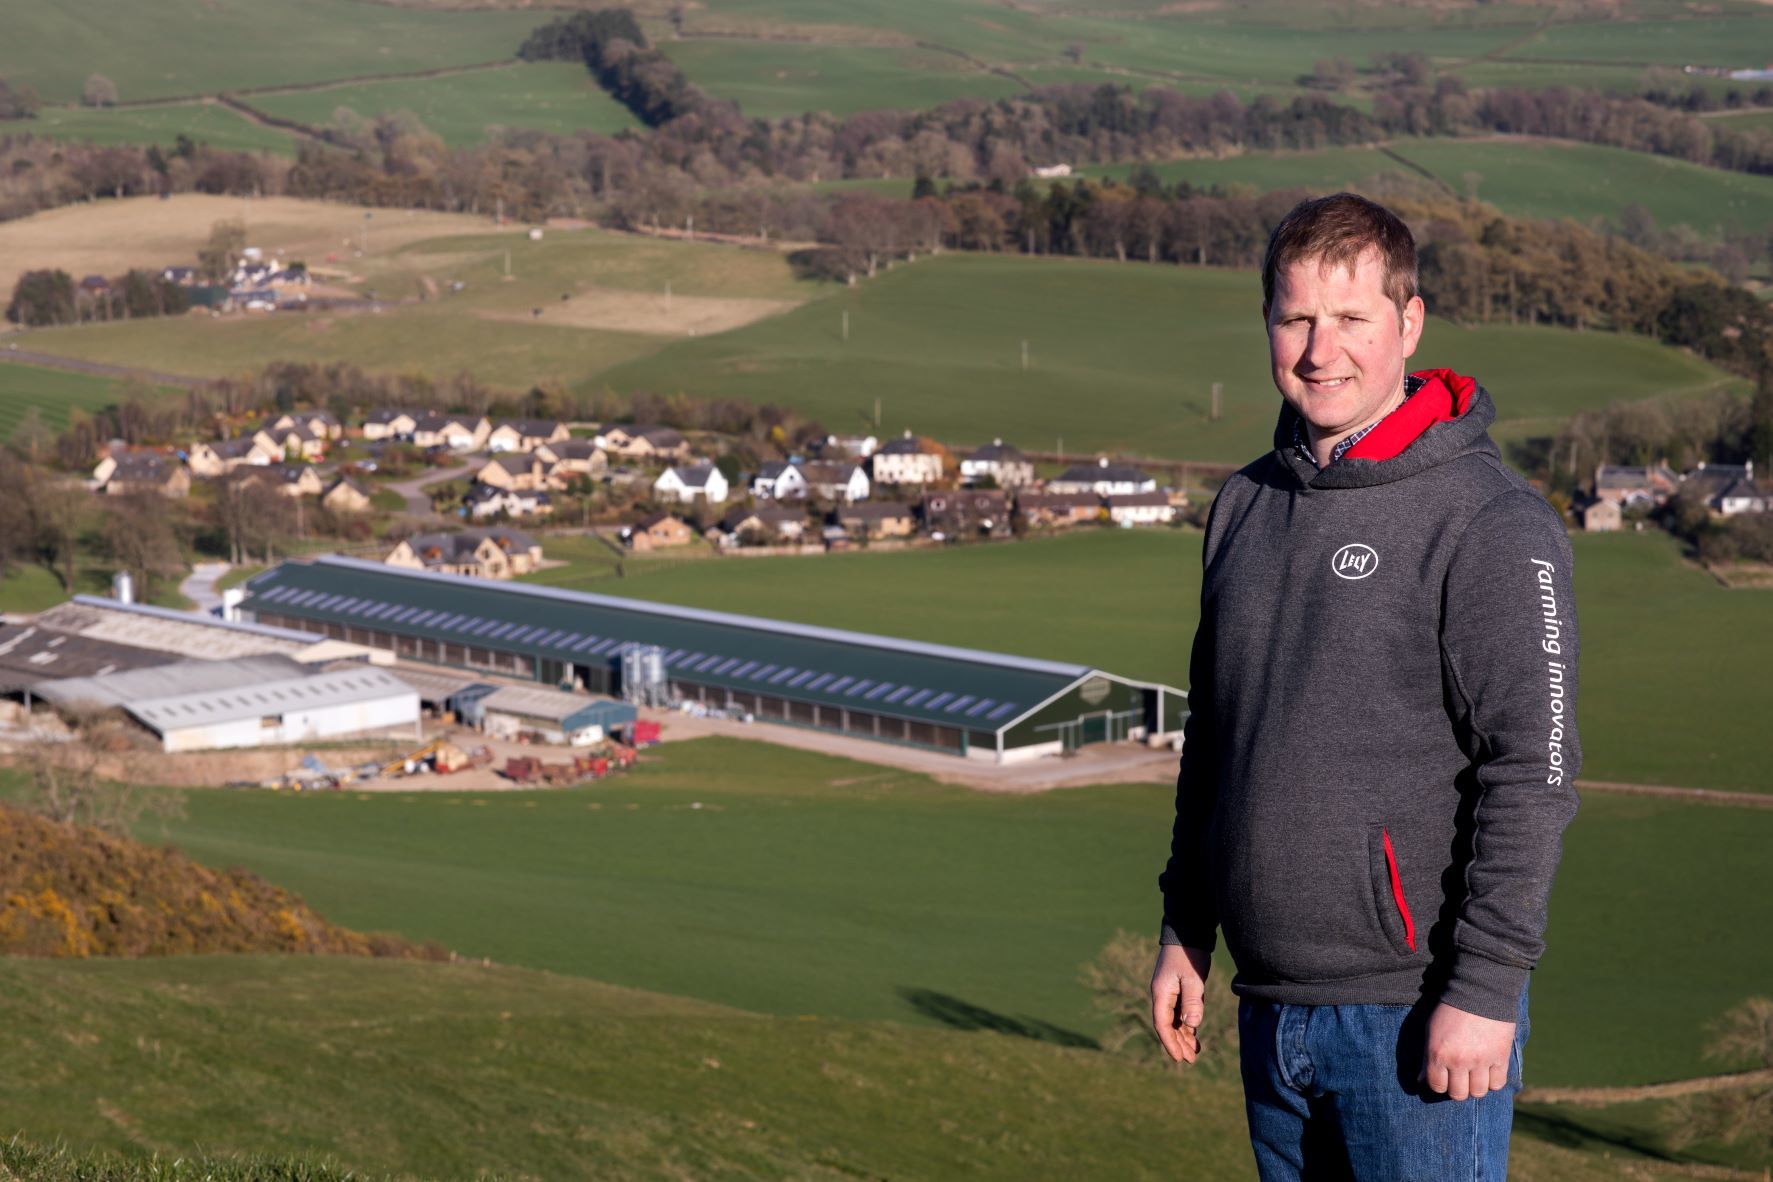 Blyth Farm comprises some 950 acres to include hill ground for the dry cows and a new barn measures 420m by 220m